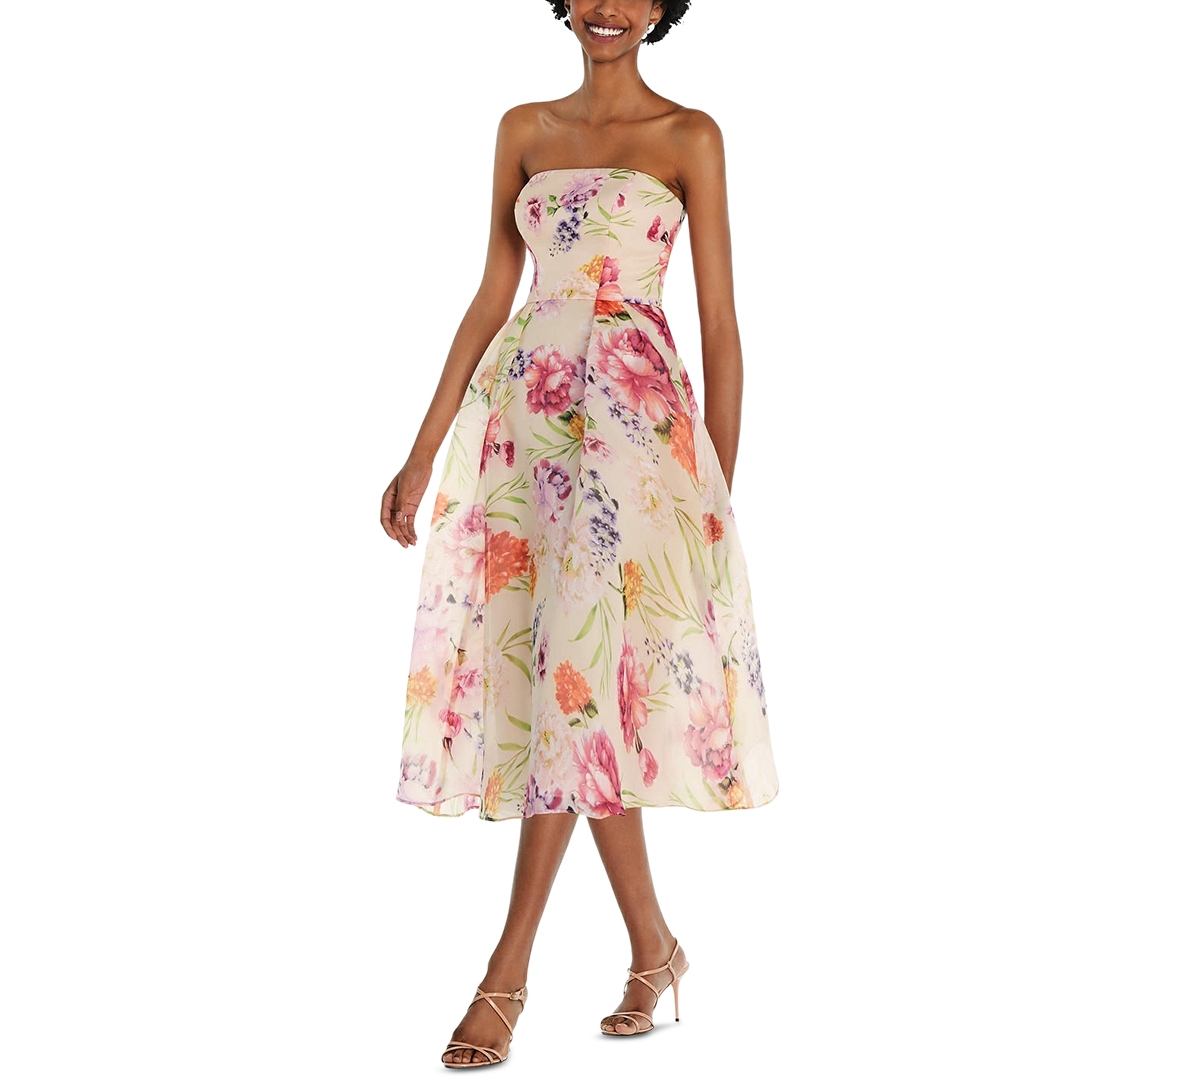 ALFRED SUNG WOMEN'S STRAPLESS FLORAL ORGANDY MIDI DRESS